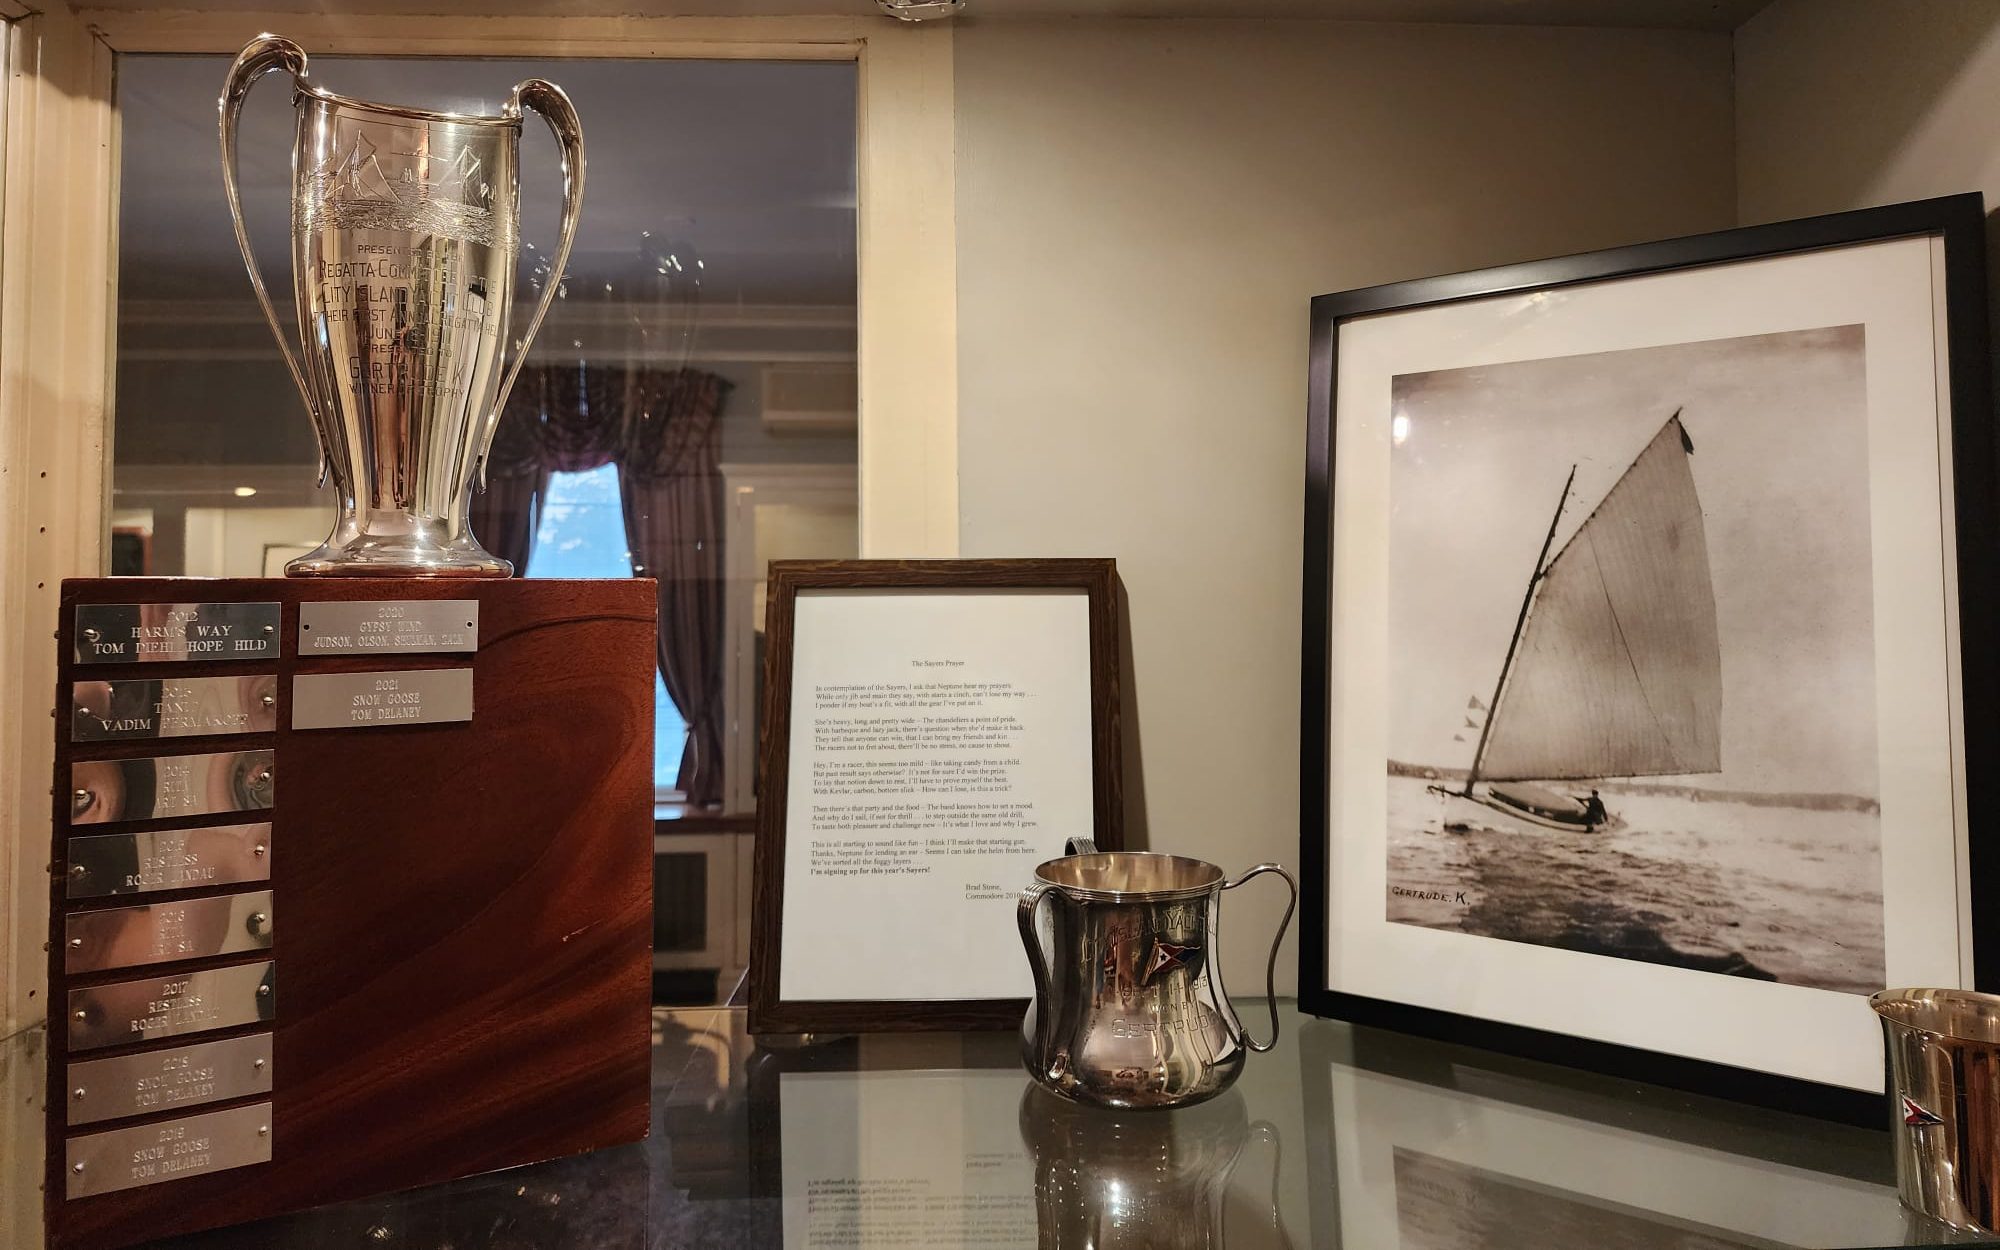 Sayers Series trophy and invocation at City Island Yacht Club